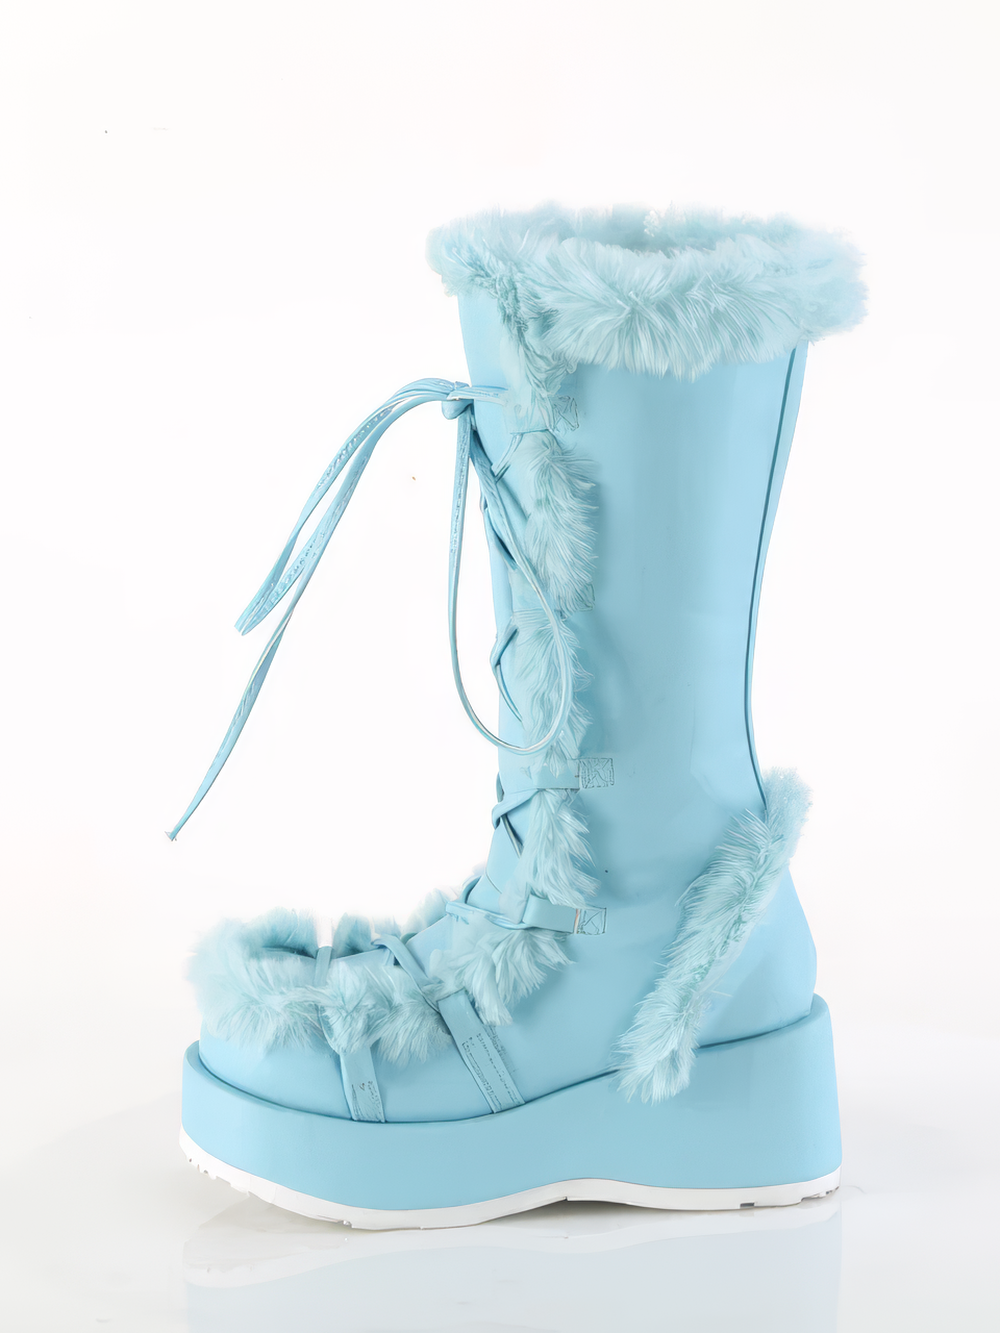 DEMONIA Women's Pastel Goth Style Light Blue Leather Boots